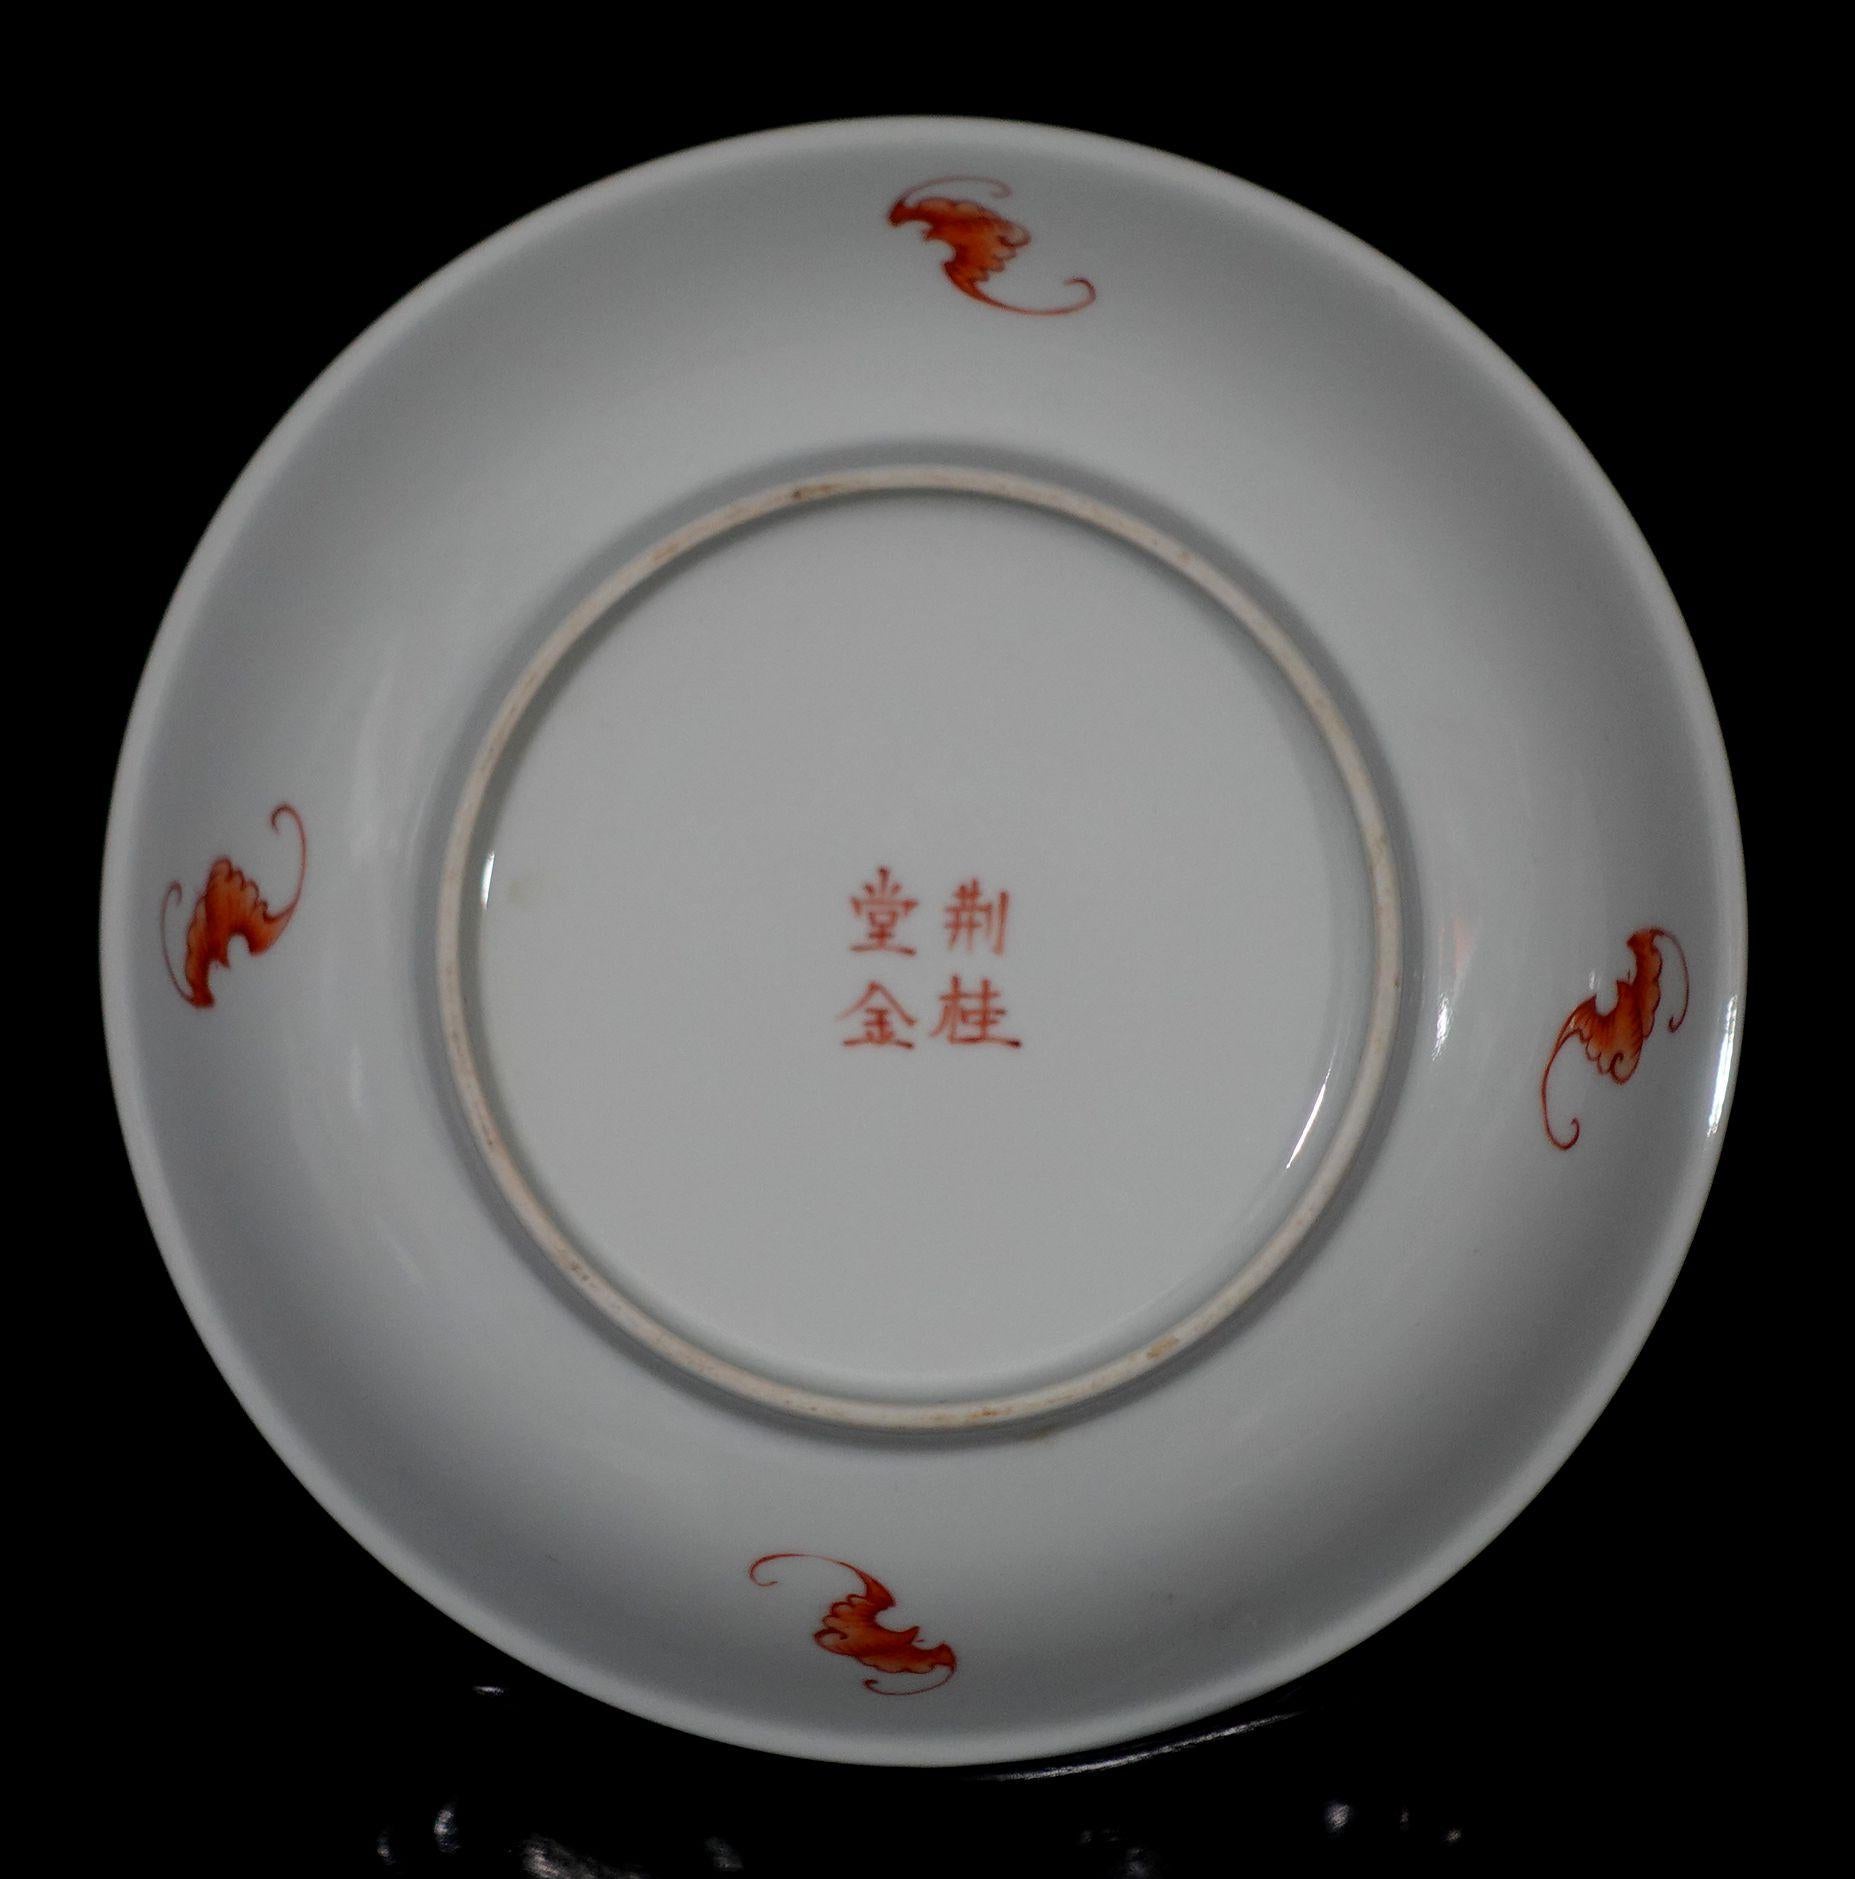 Antique Pair of Famille Rose Plates on Wood Stands Marked (荊桂堂金), 19th Century 3